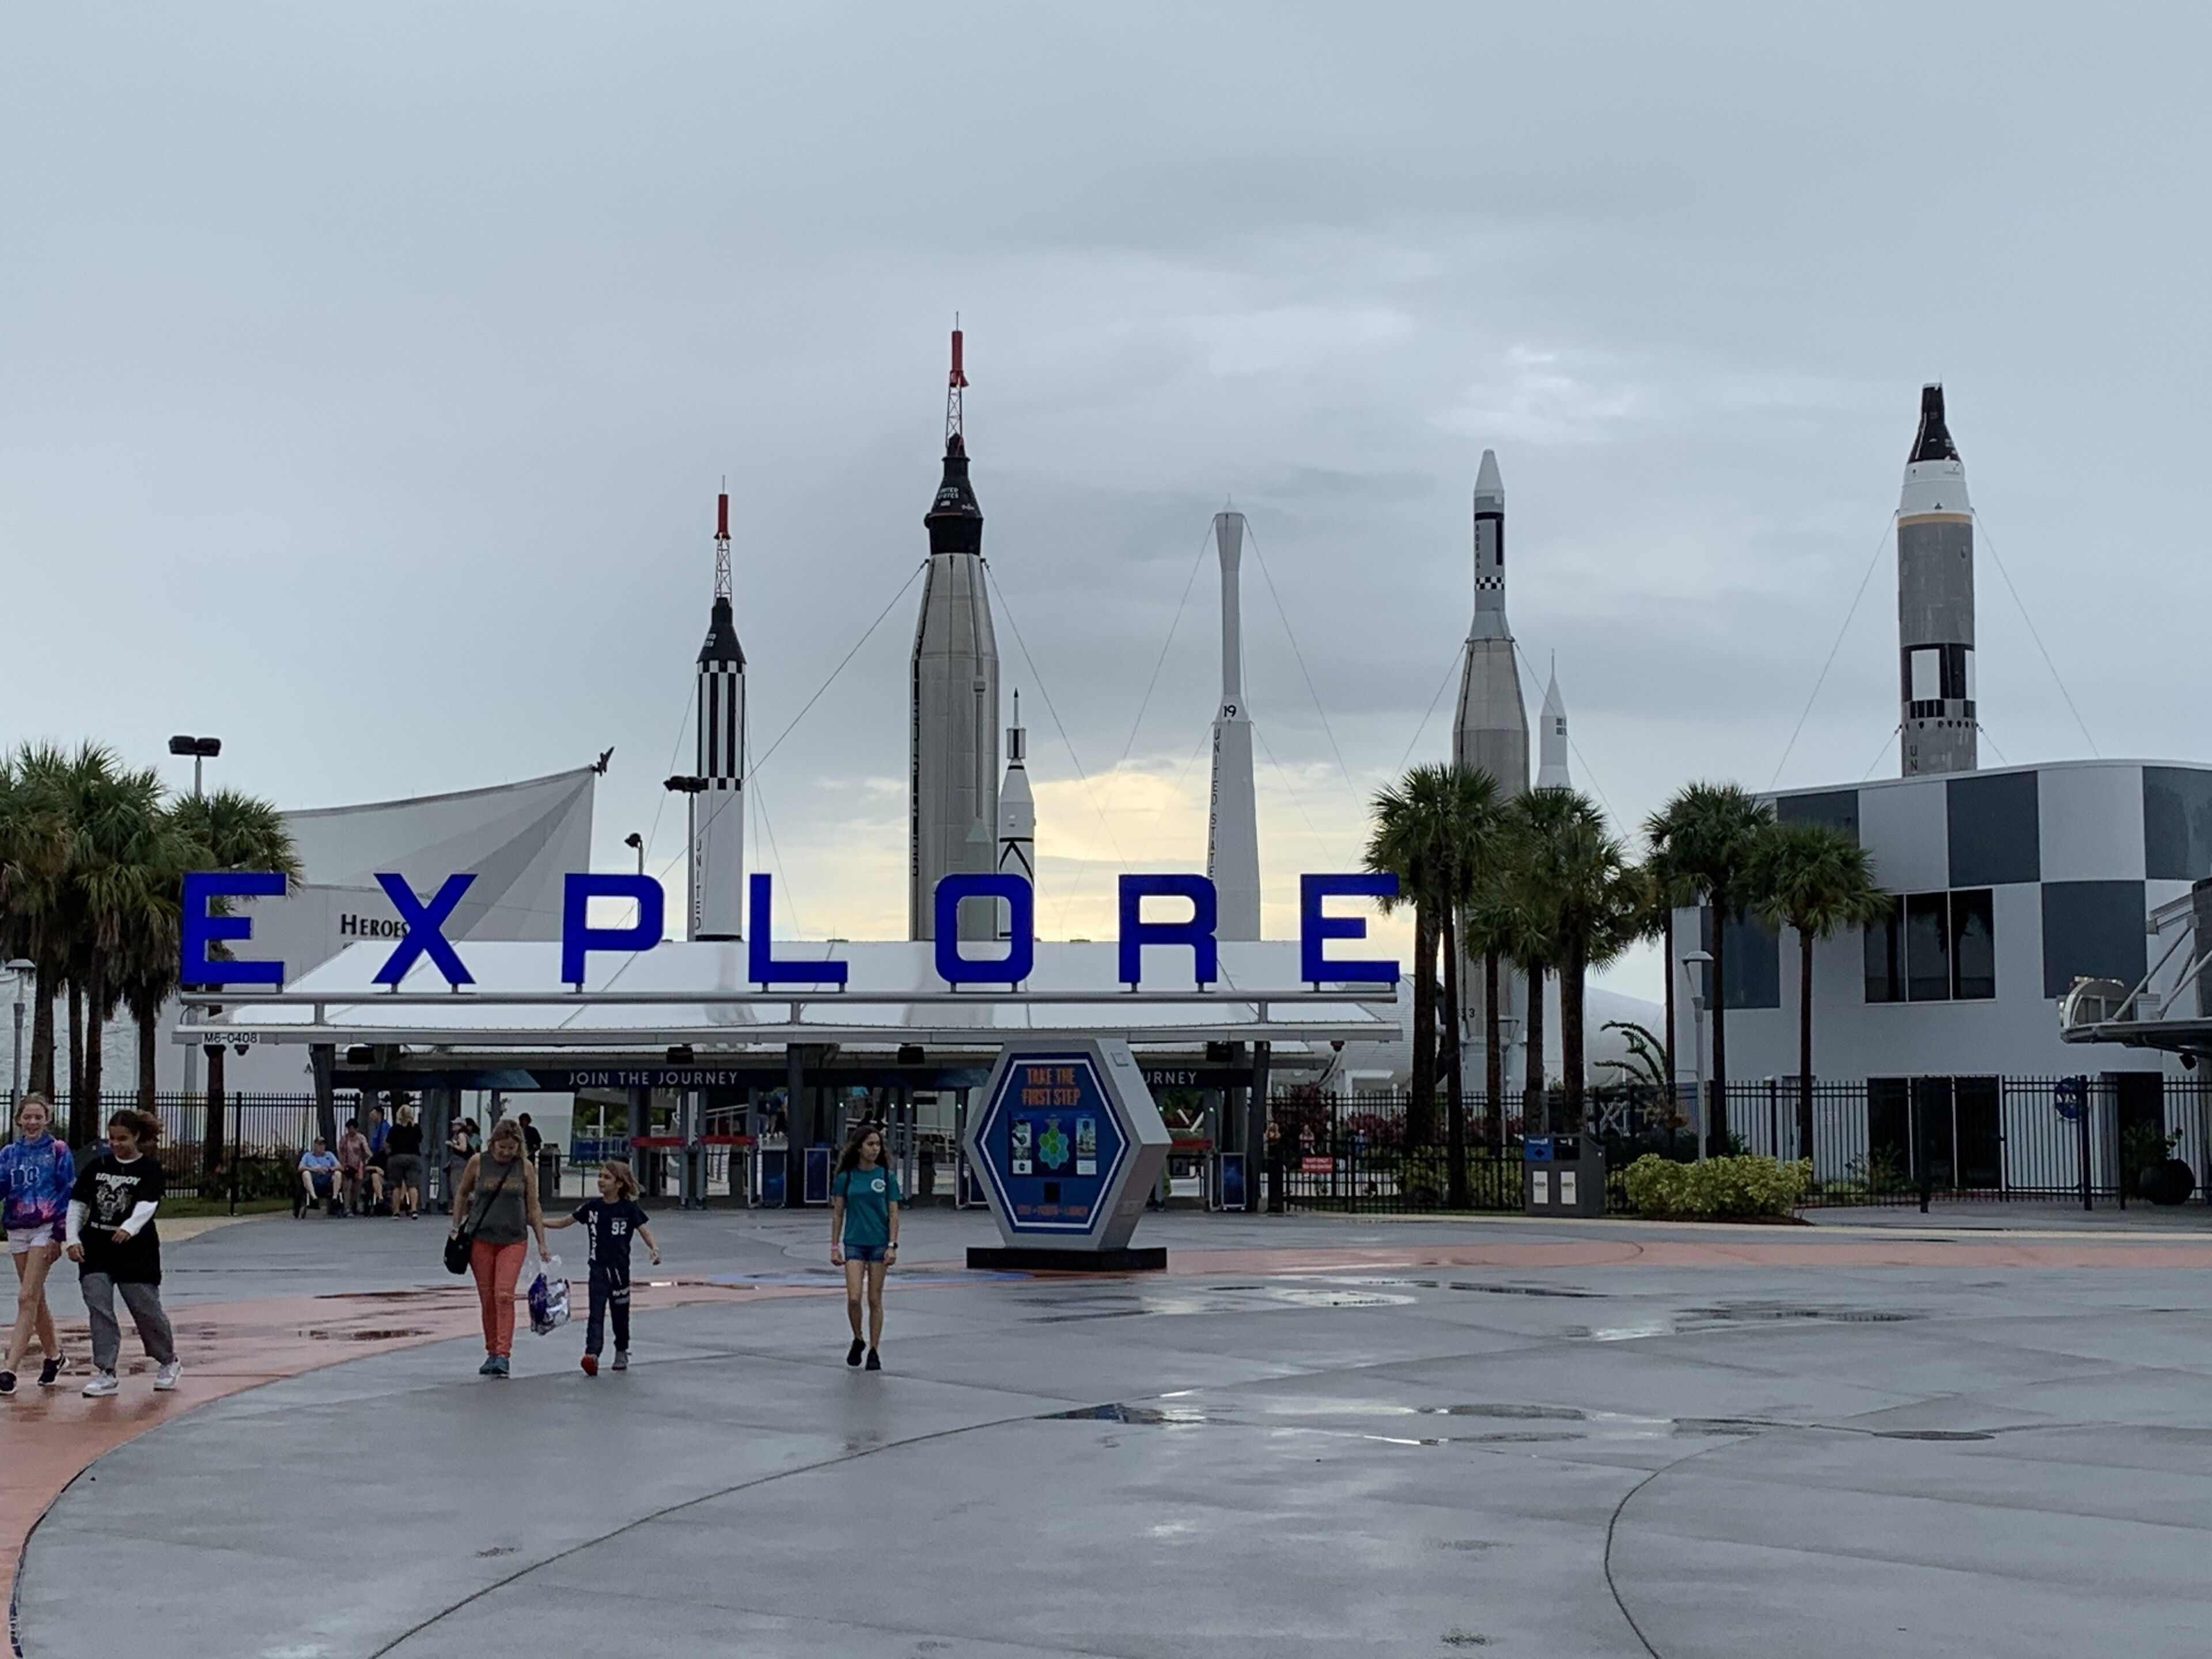 does cape canaveral have tours